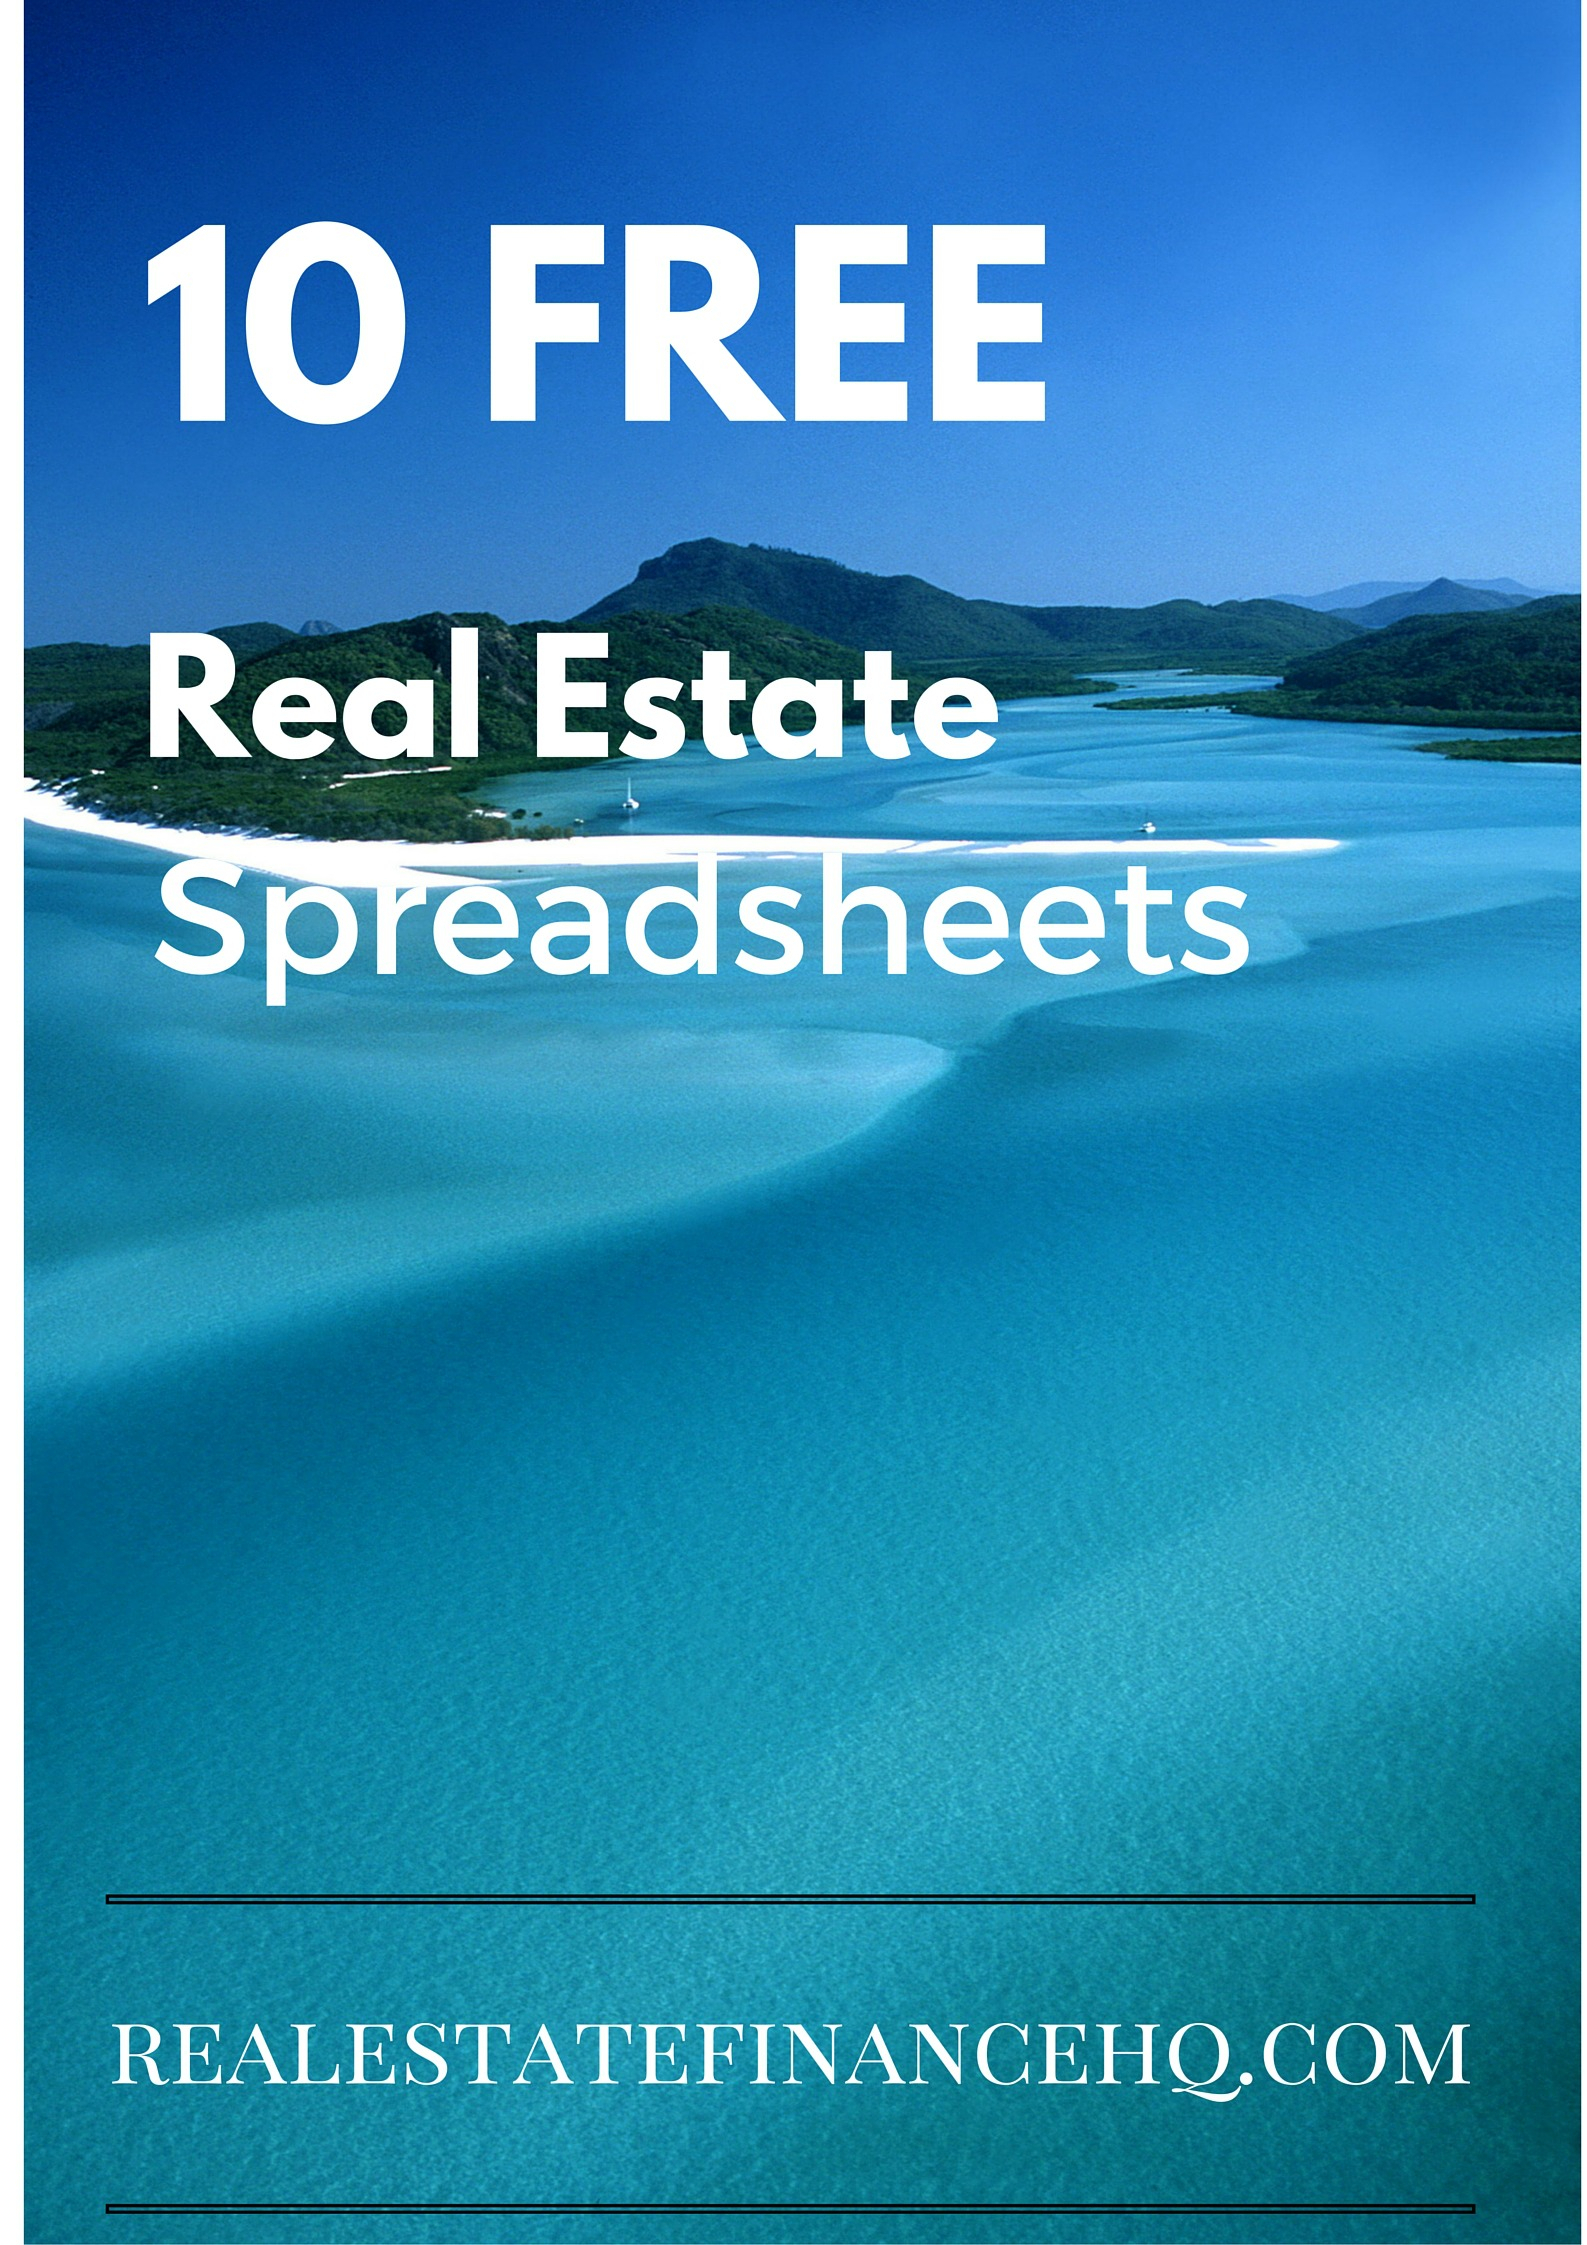 Real Estate Spreadsheet For 10 Free Real Estate Spreadsheets  Real Estate Finance